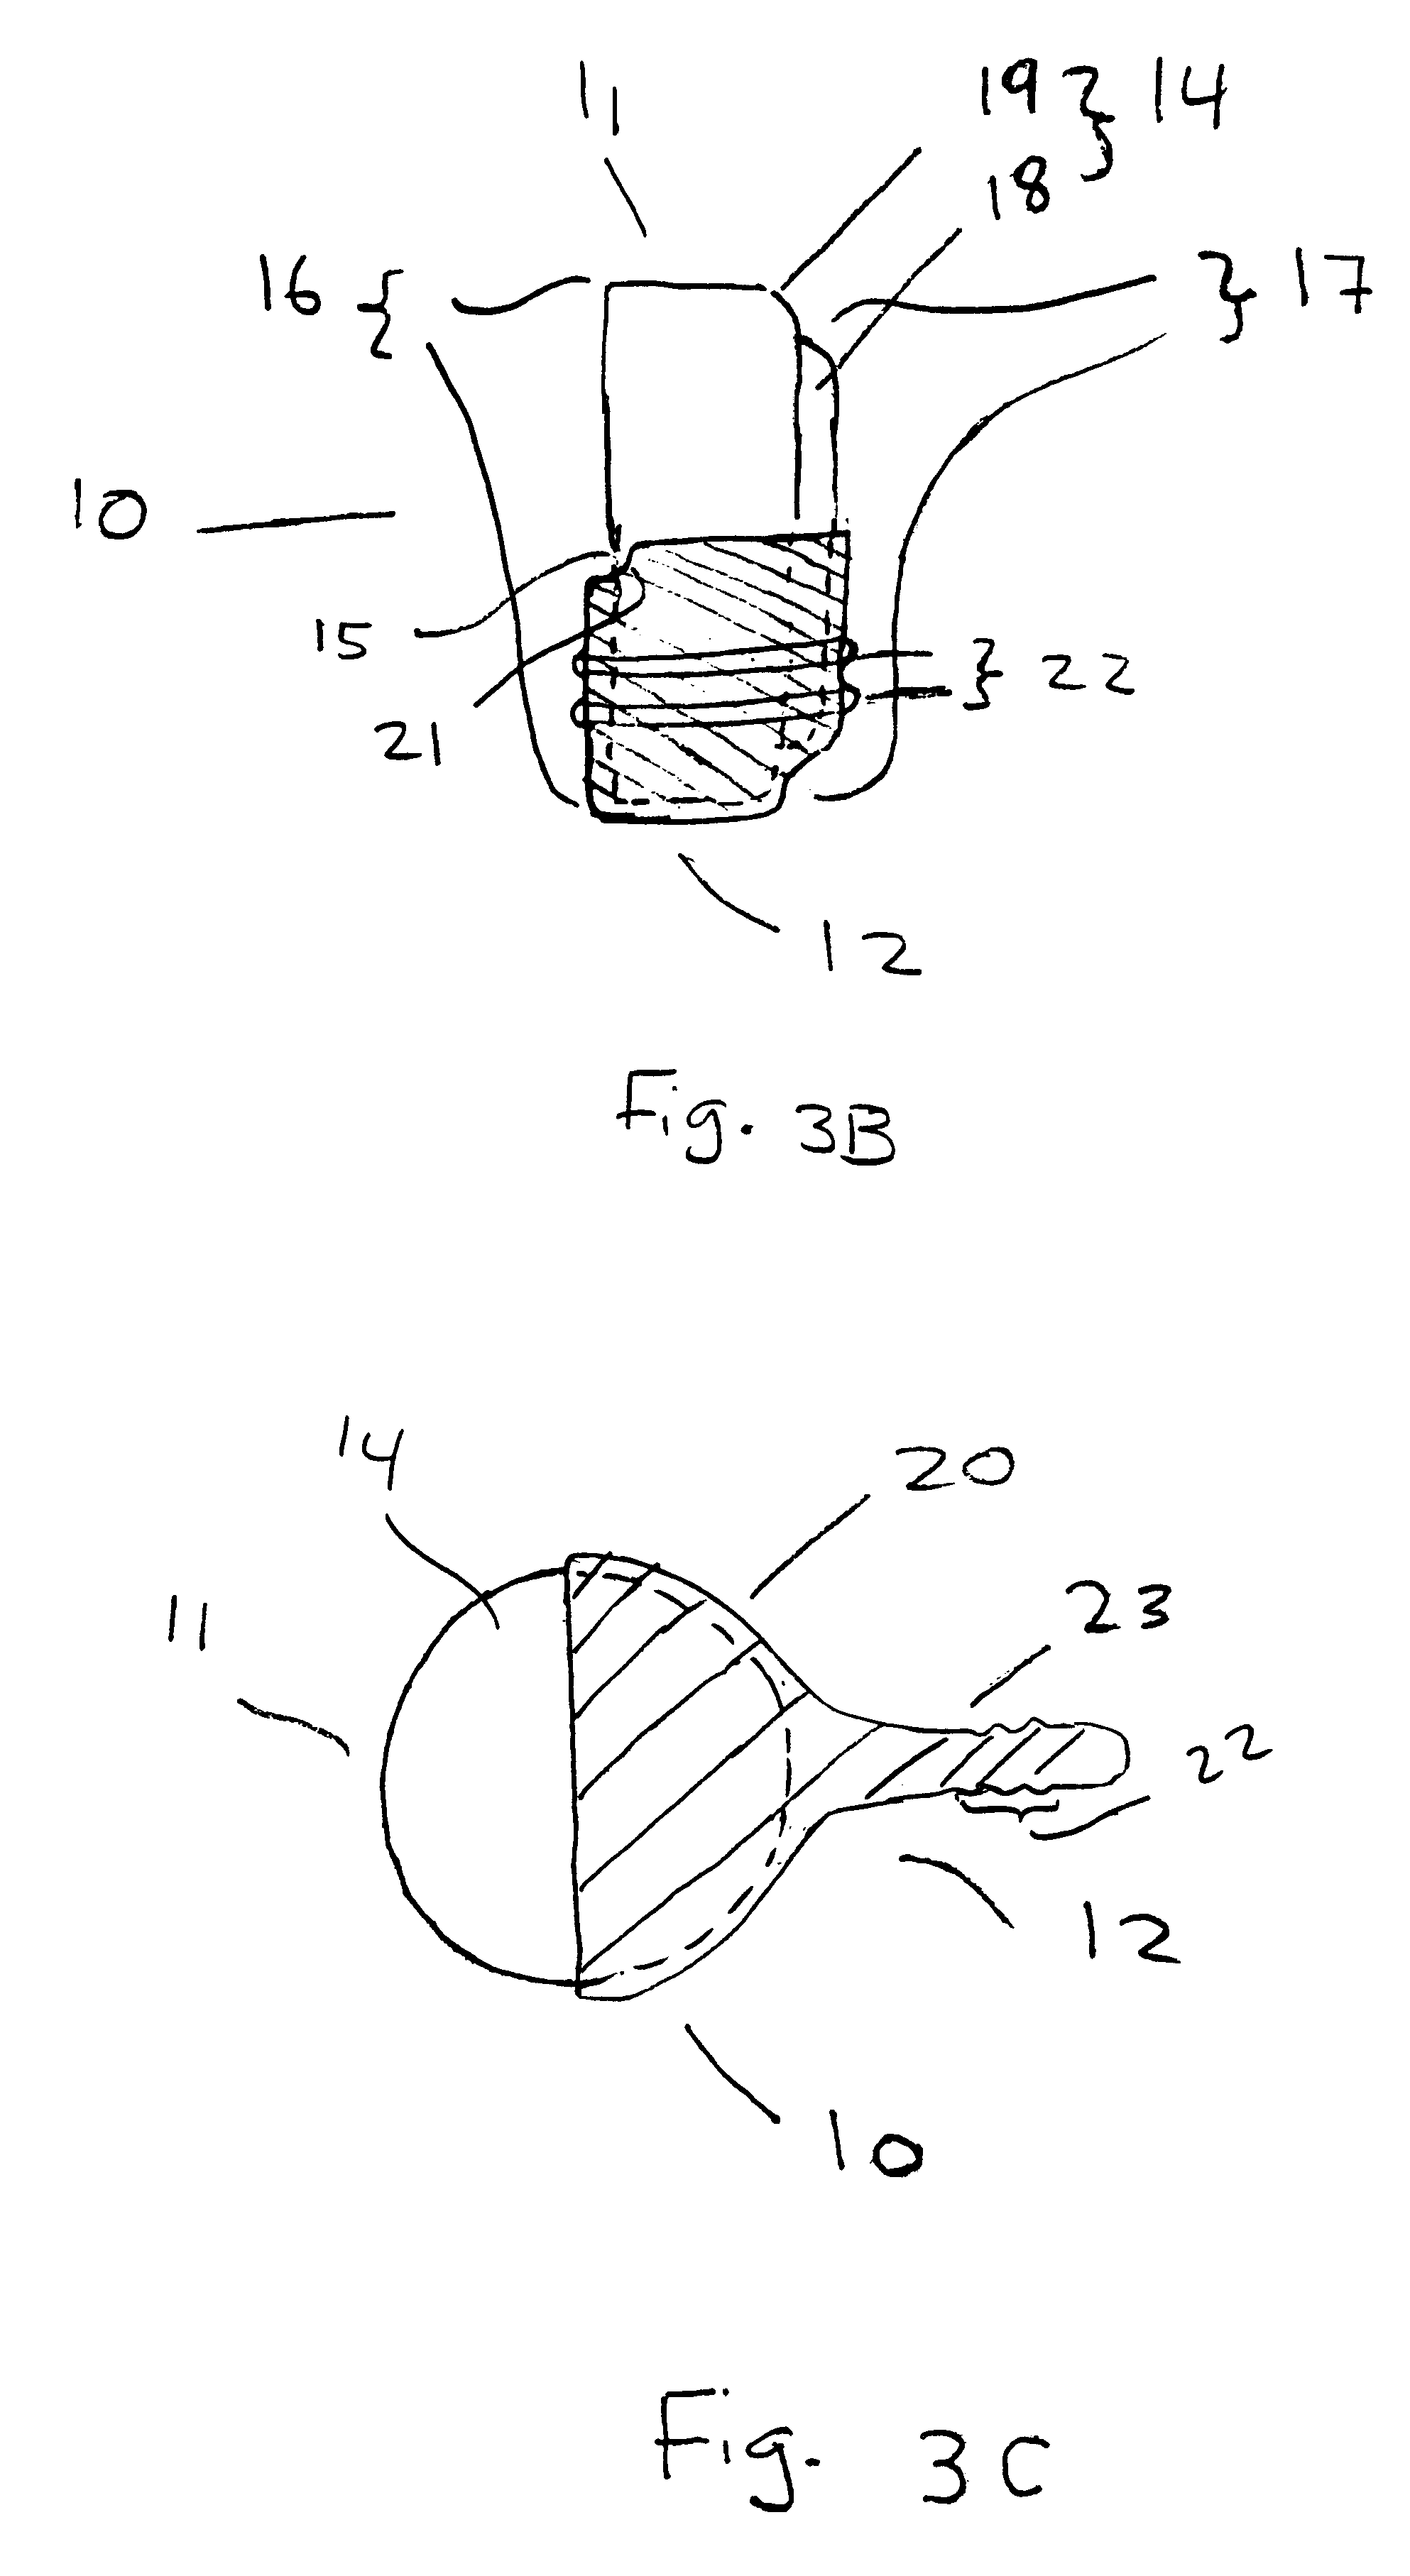 Hearing device with protruding battery assembly